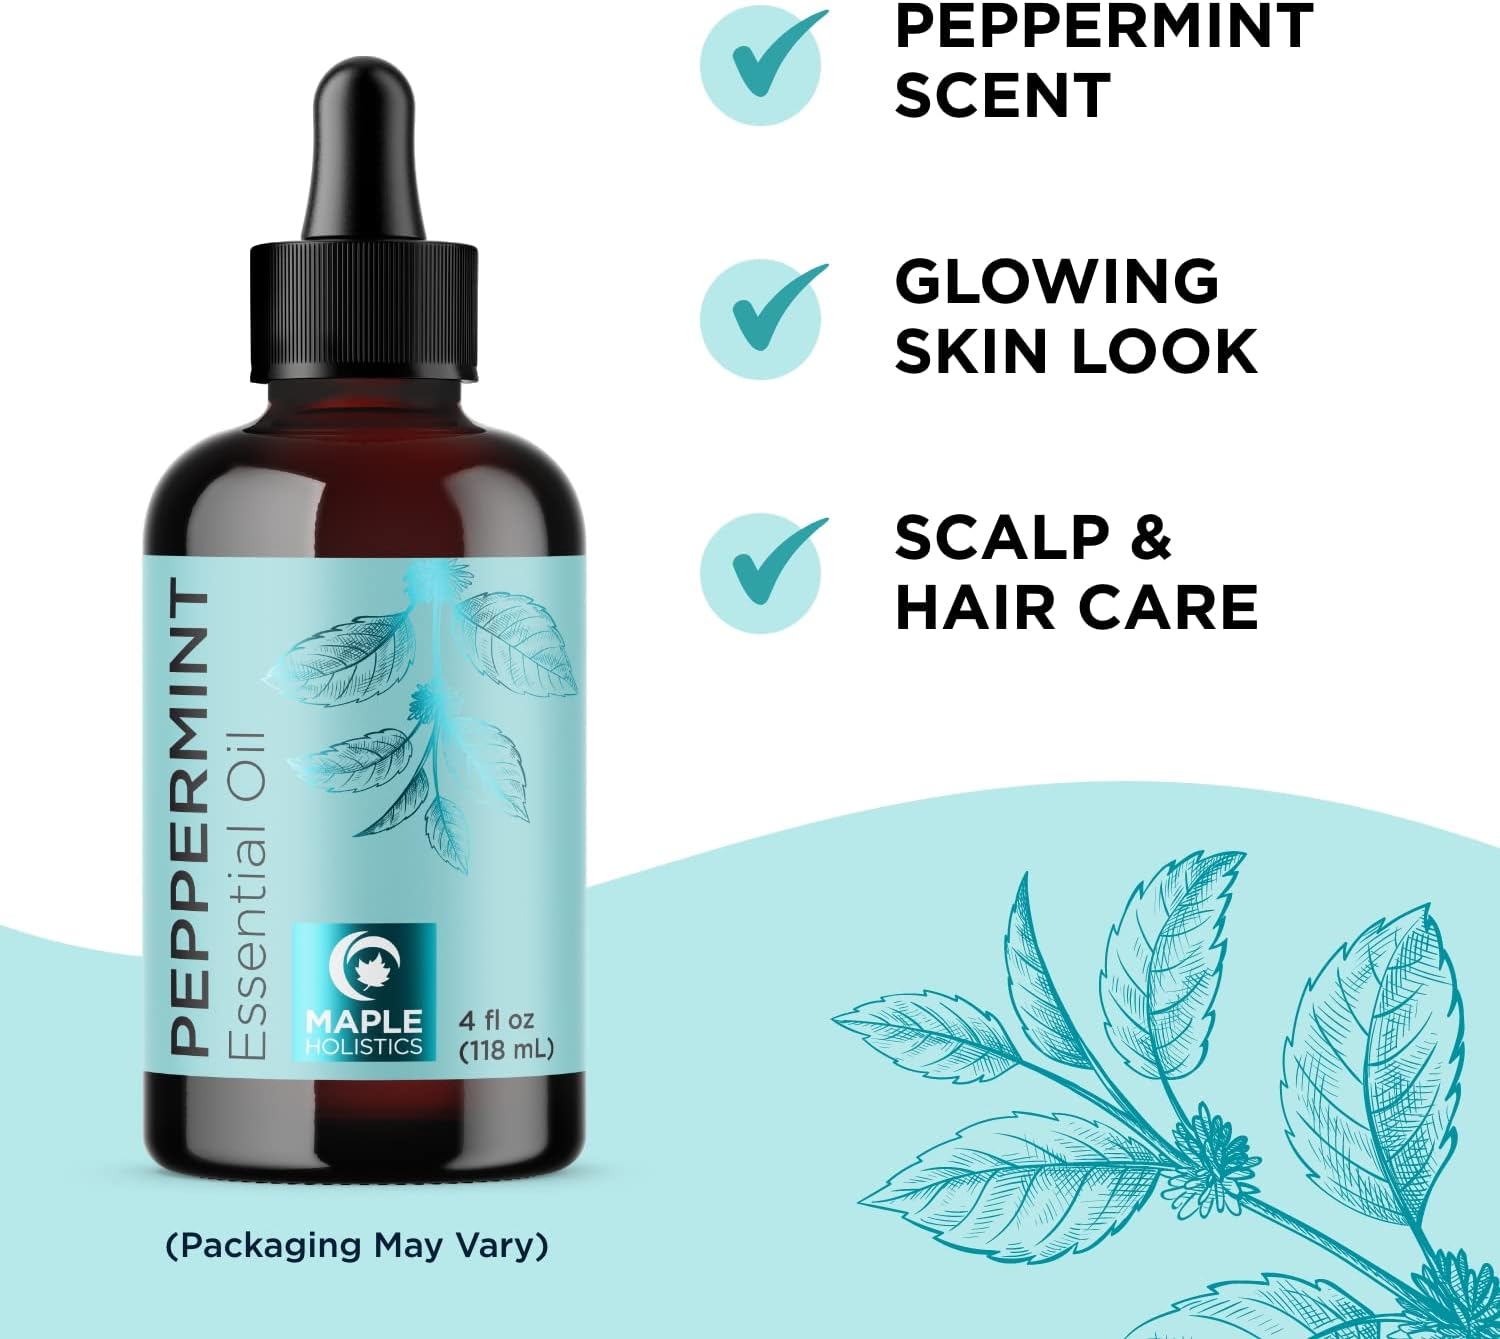 Maple Holistics Peppermint Essential Oil for Diffuser Aromatherapy - 100% Pure Peppermint Oil for Hair Skin and Nails Plus Undiluted Refreshing